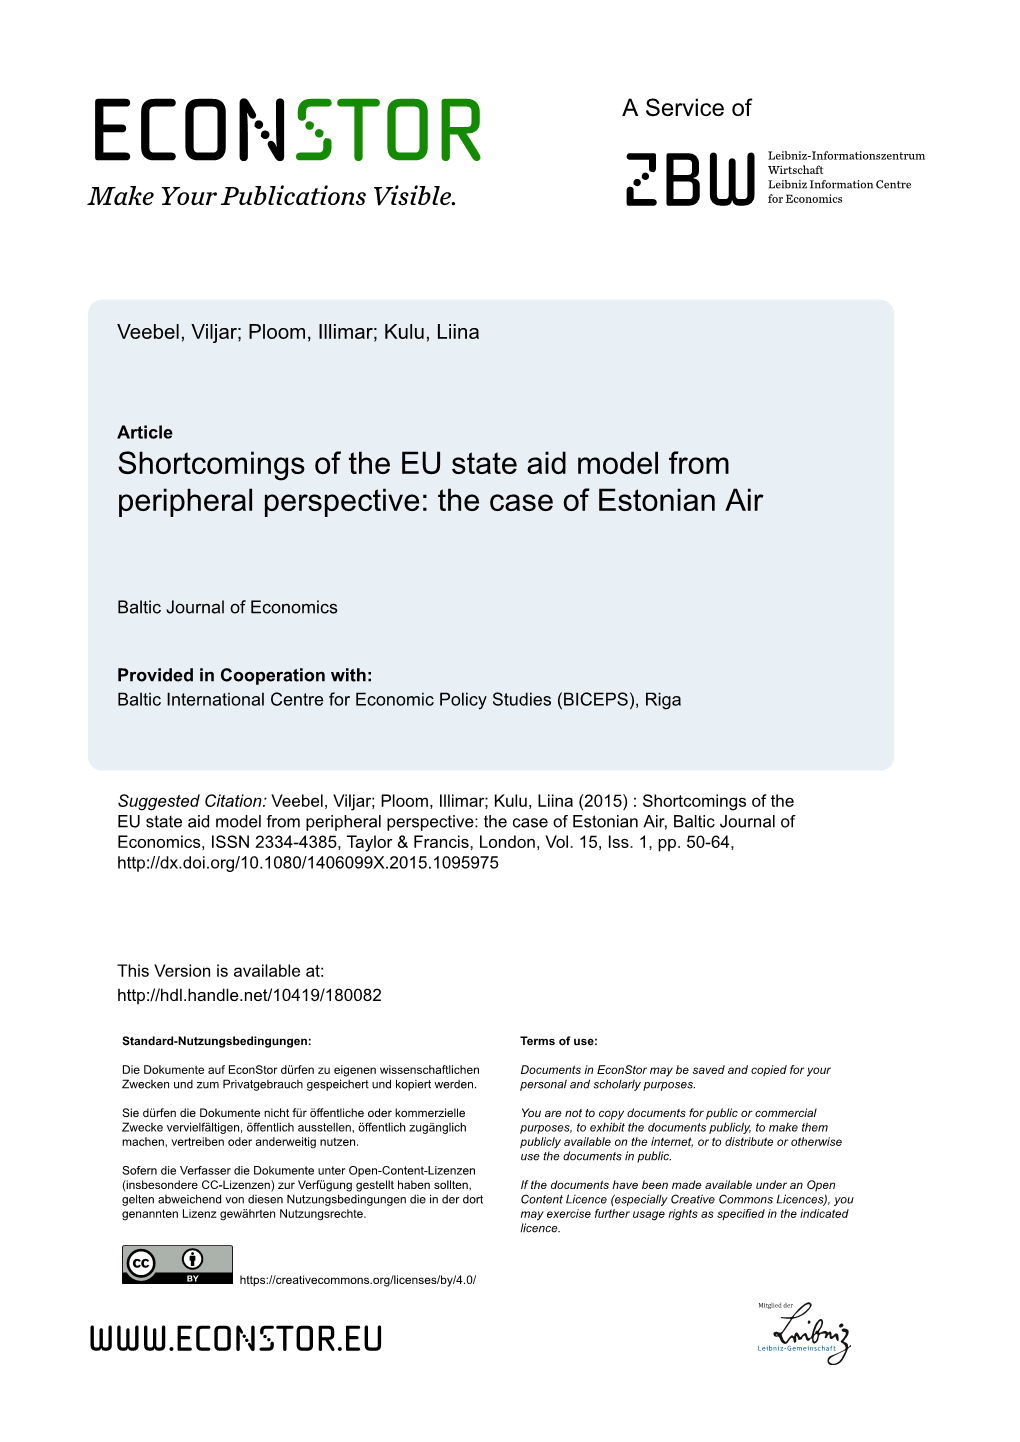 Shortcomings of the EU State Aid Model from Peripheral Perspective: the Case of Estonian Air